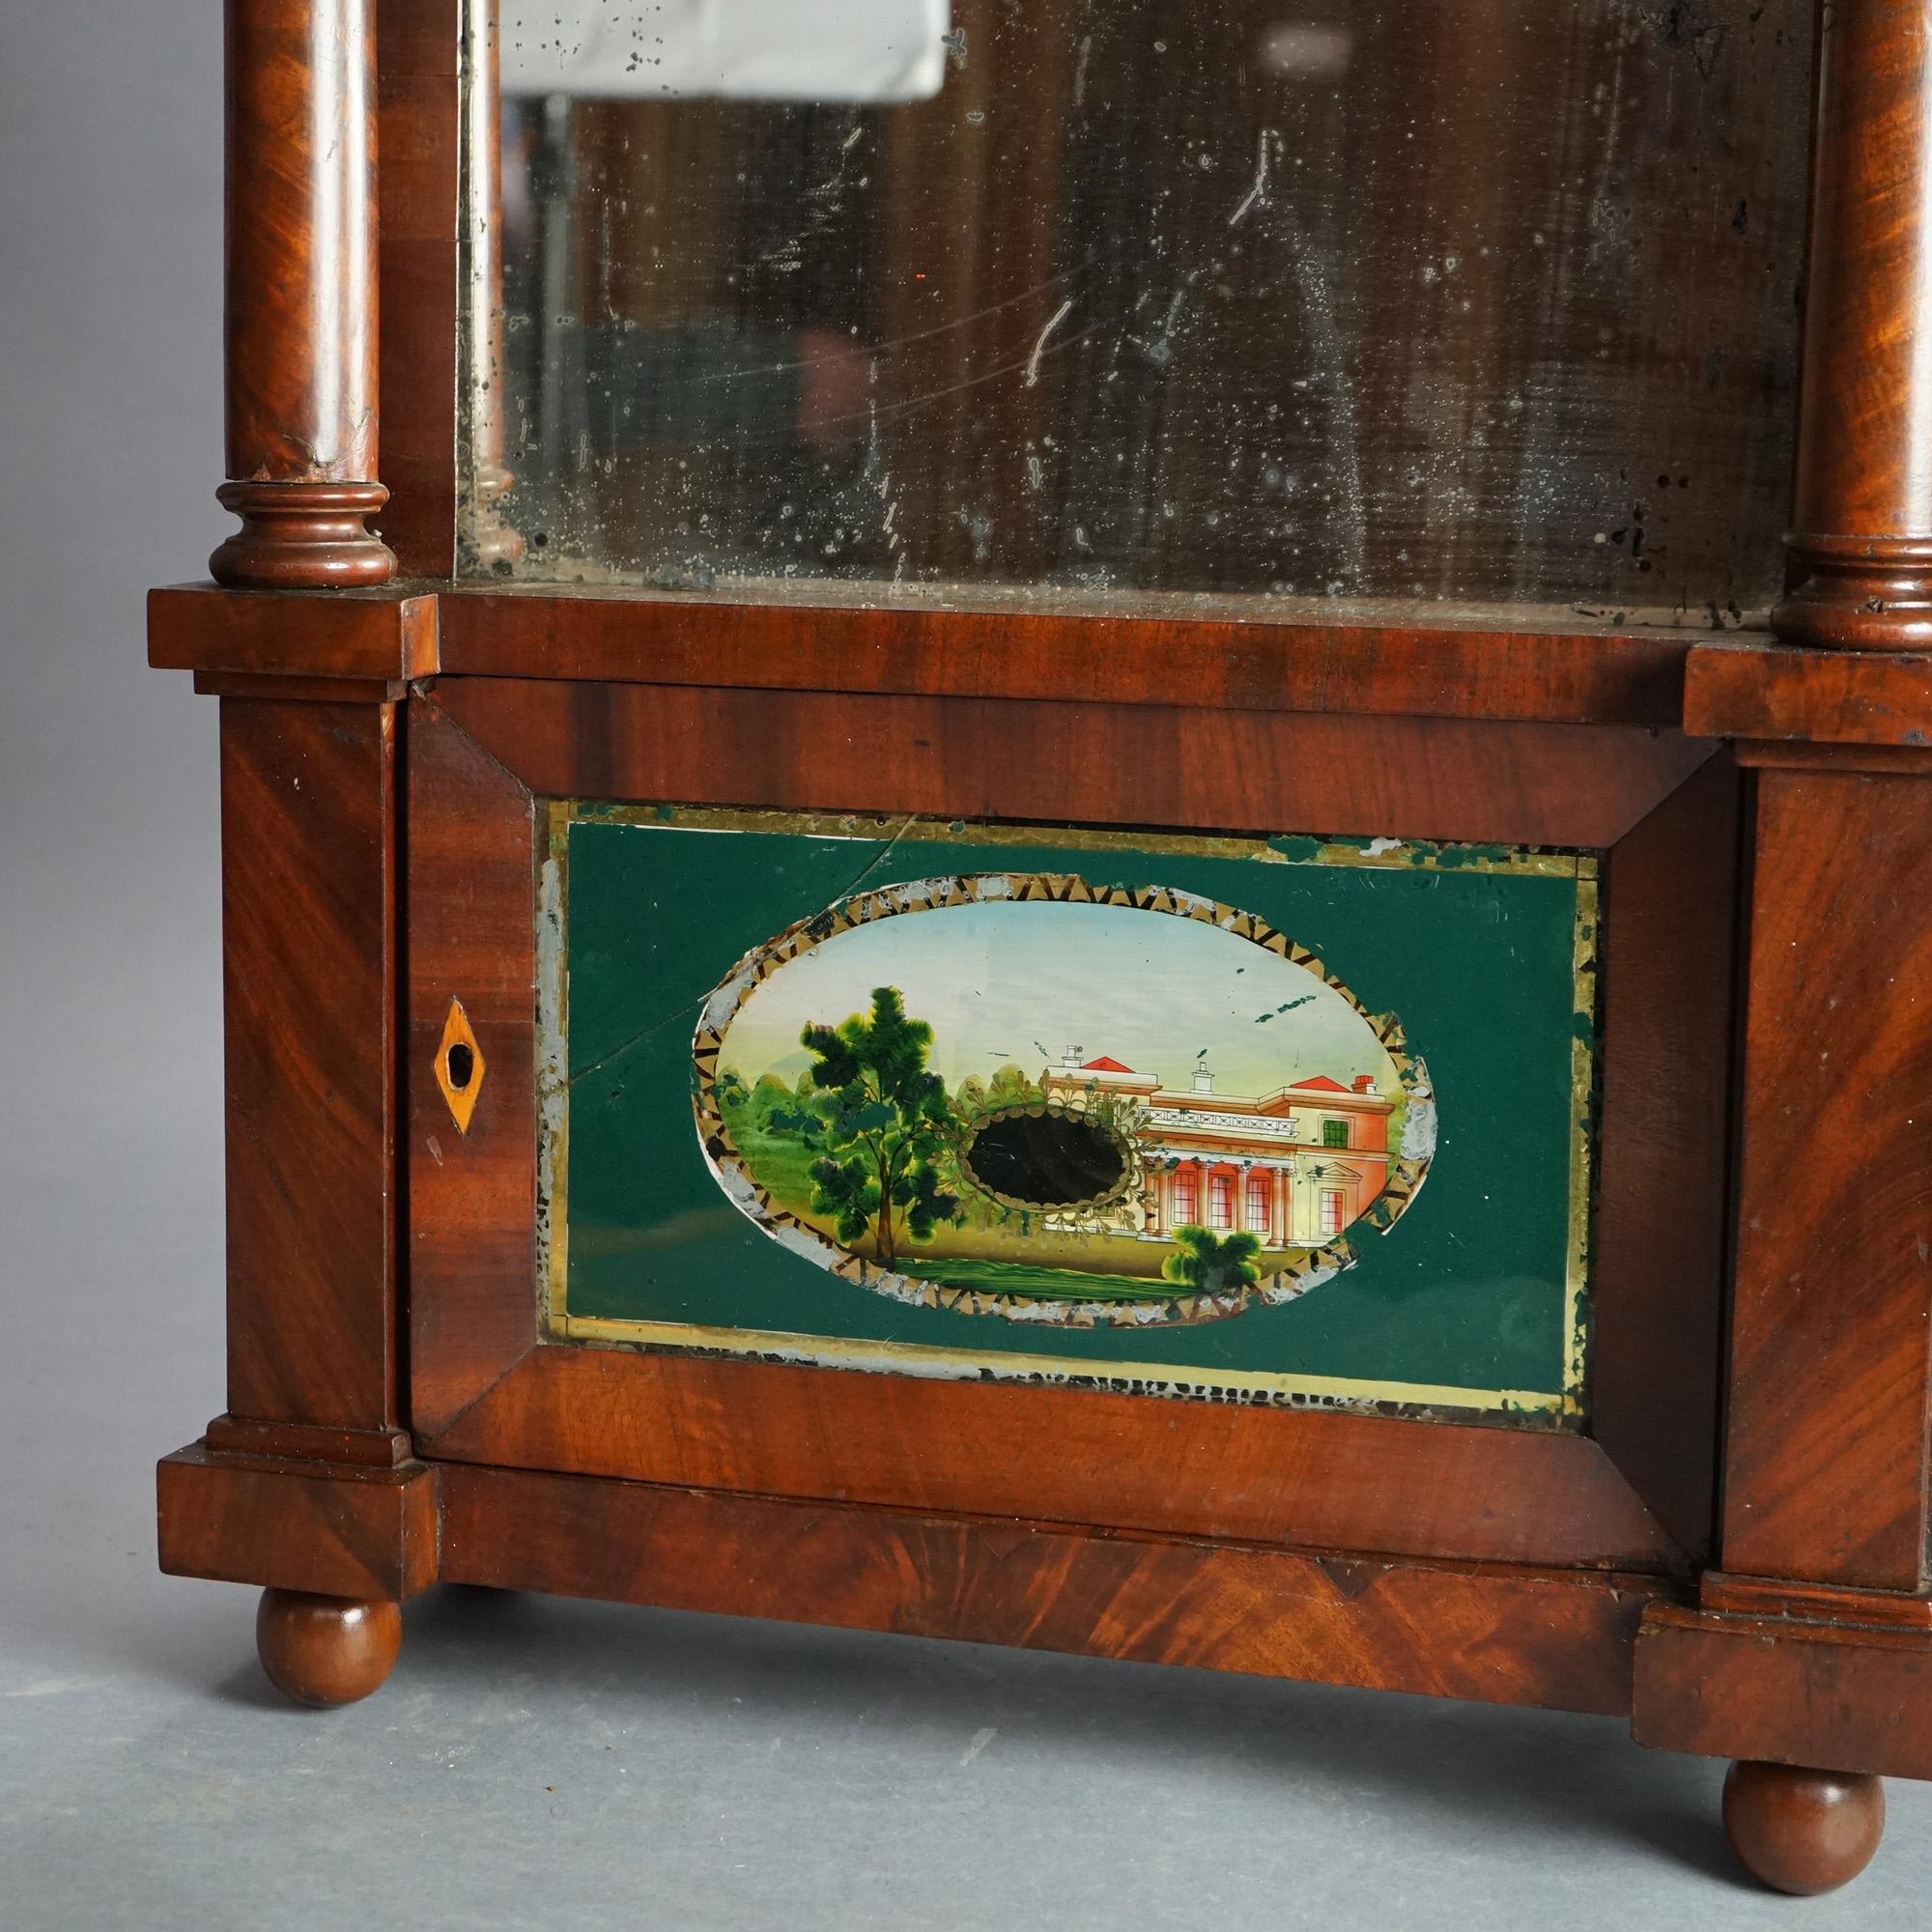 ***Ask About Reduced In-House Delivery Rates - Reliable Professional Service & Fully Insured***
Antique Eli Terry School American Empire Flame Mahogany Open Escapement Mantle Clock with Foliate Carved Crest, Flanking Columns and Eglomise Glass Panel